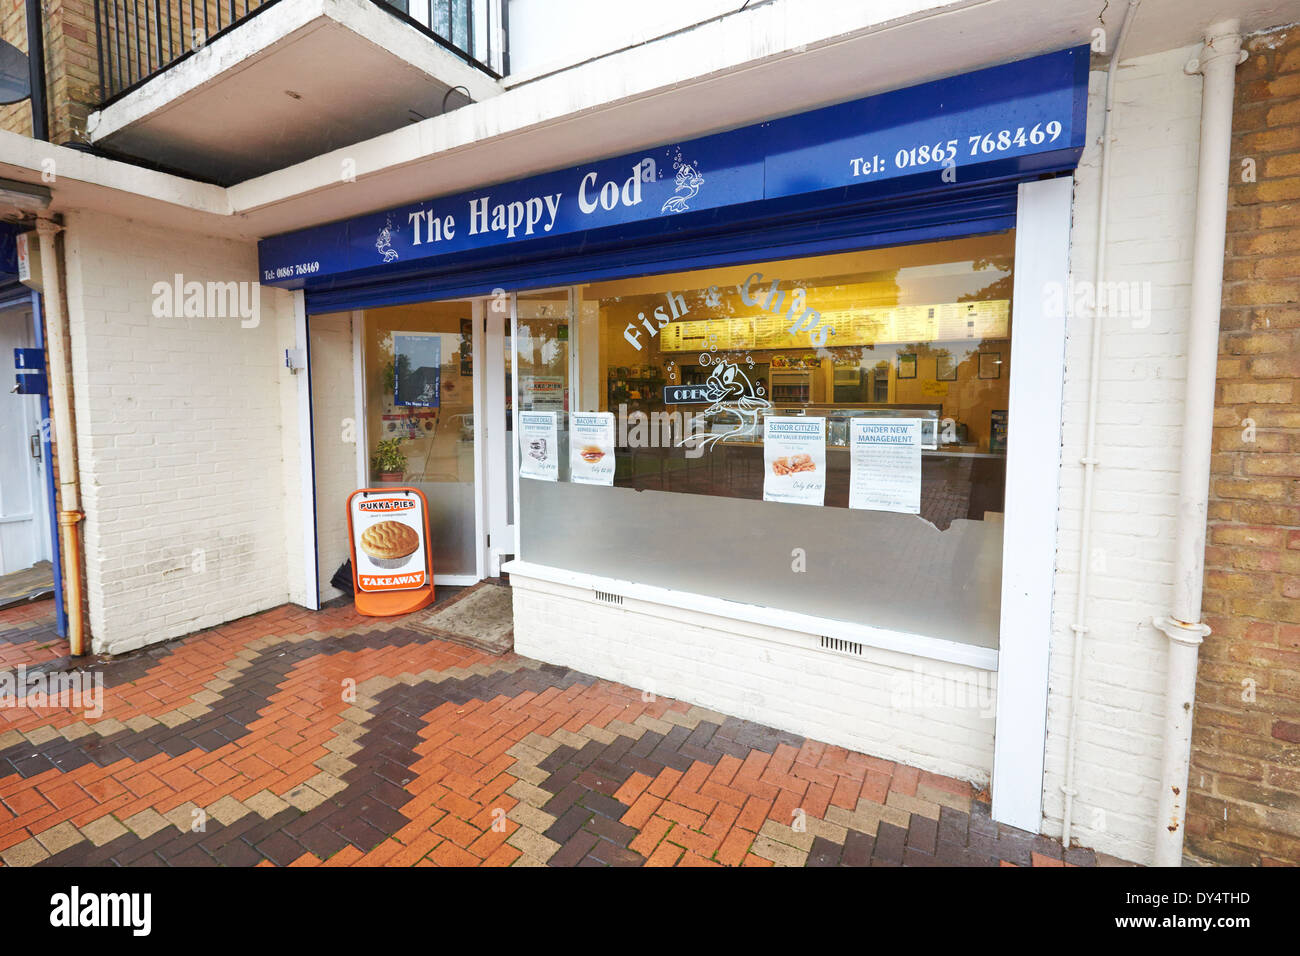 General view of the Happy Cod fish and chip shop Stock Photo